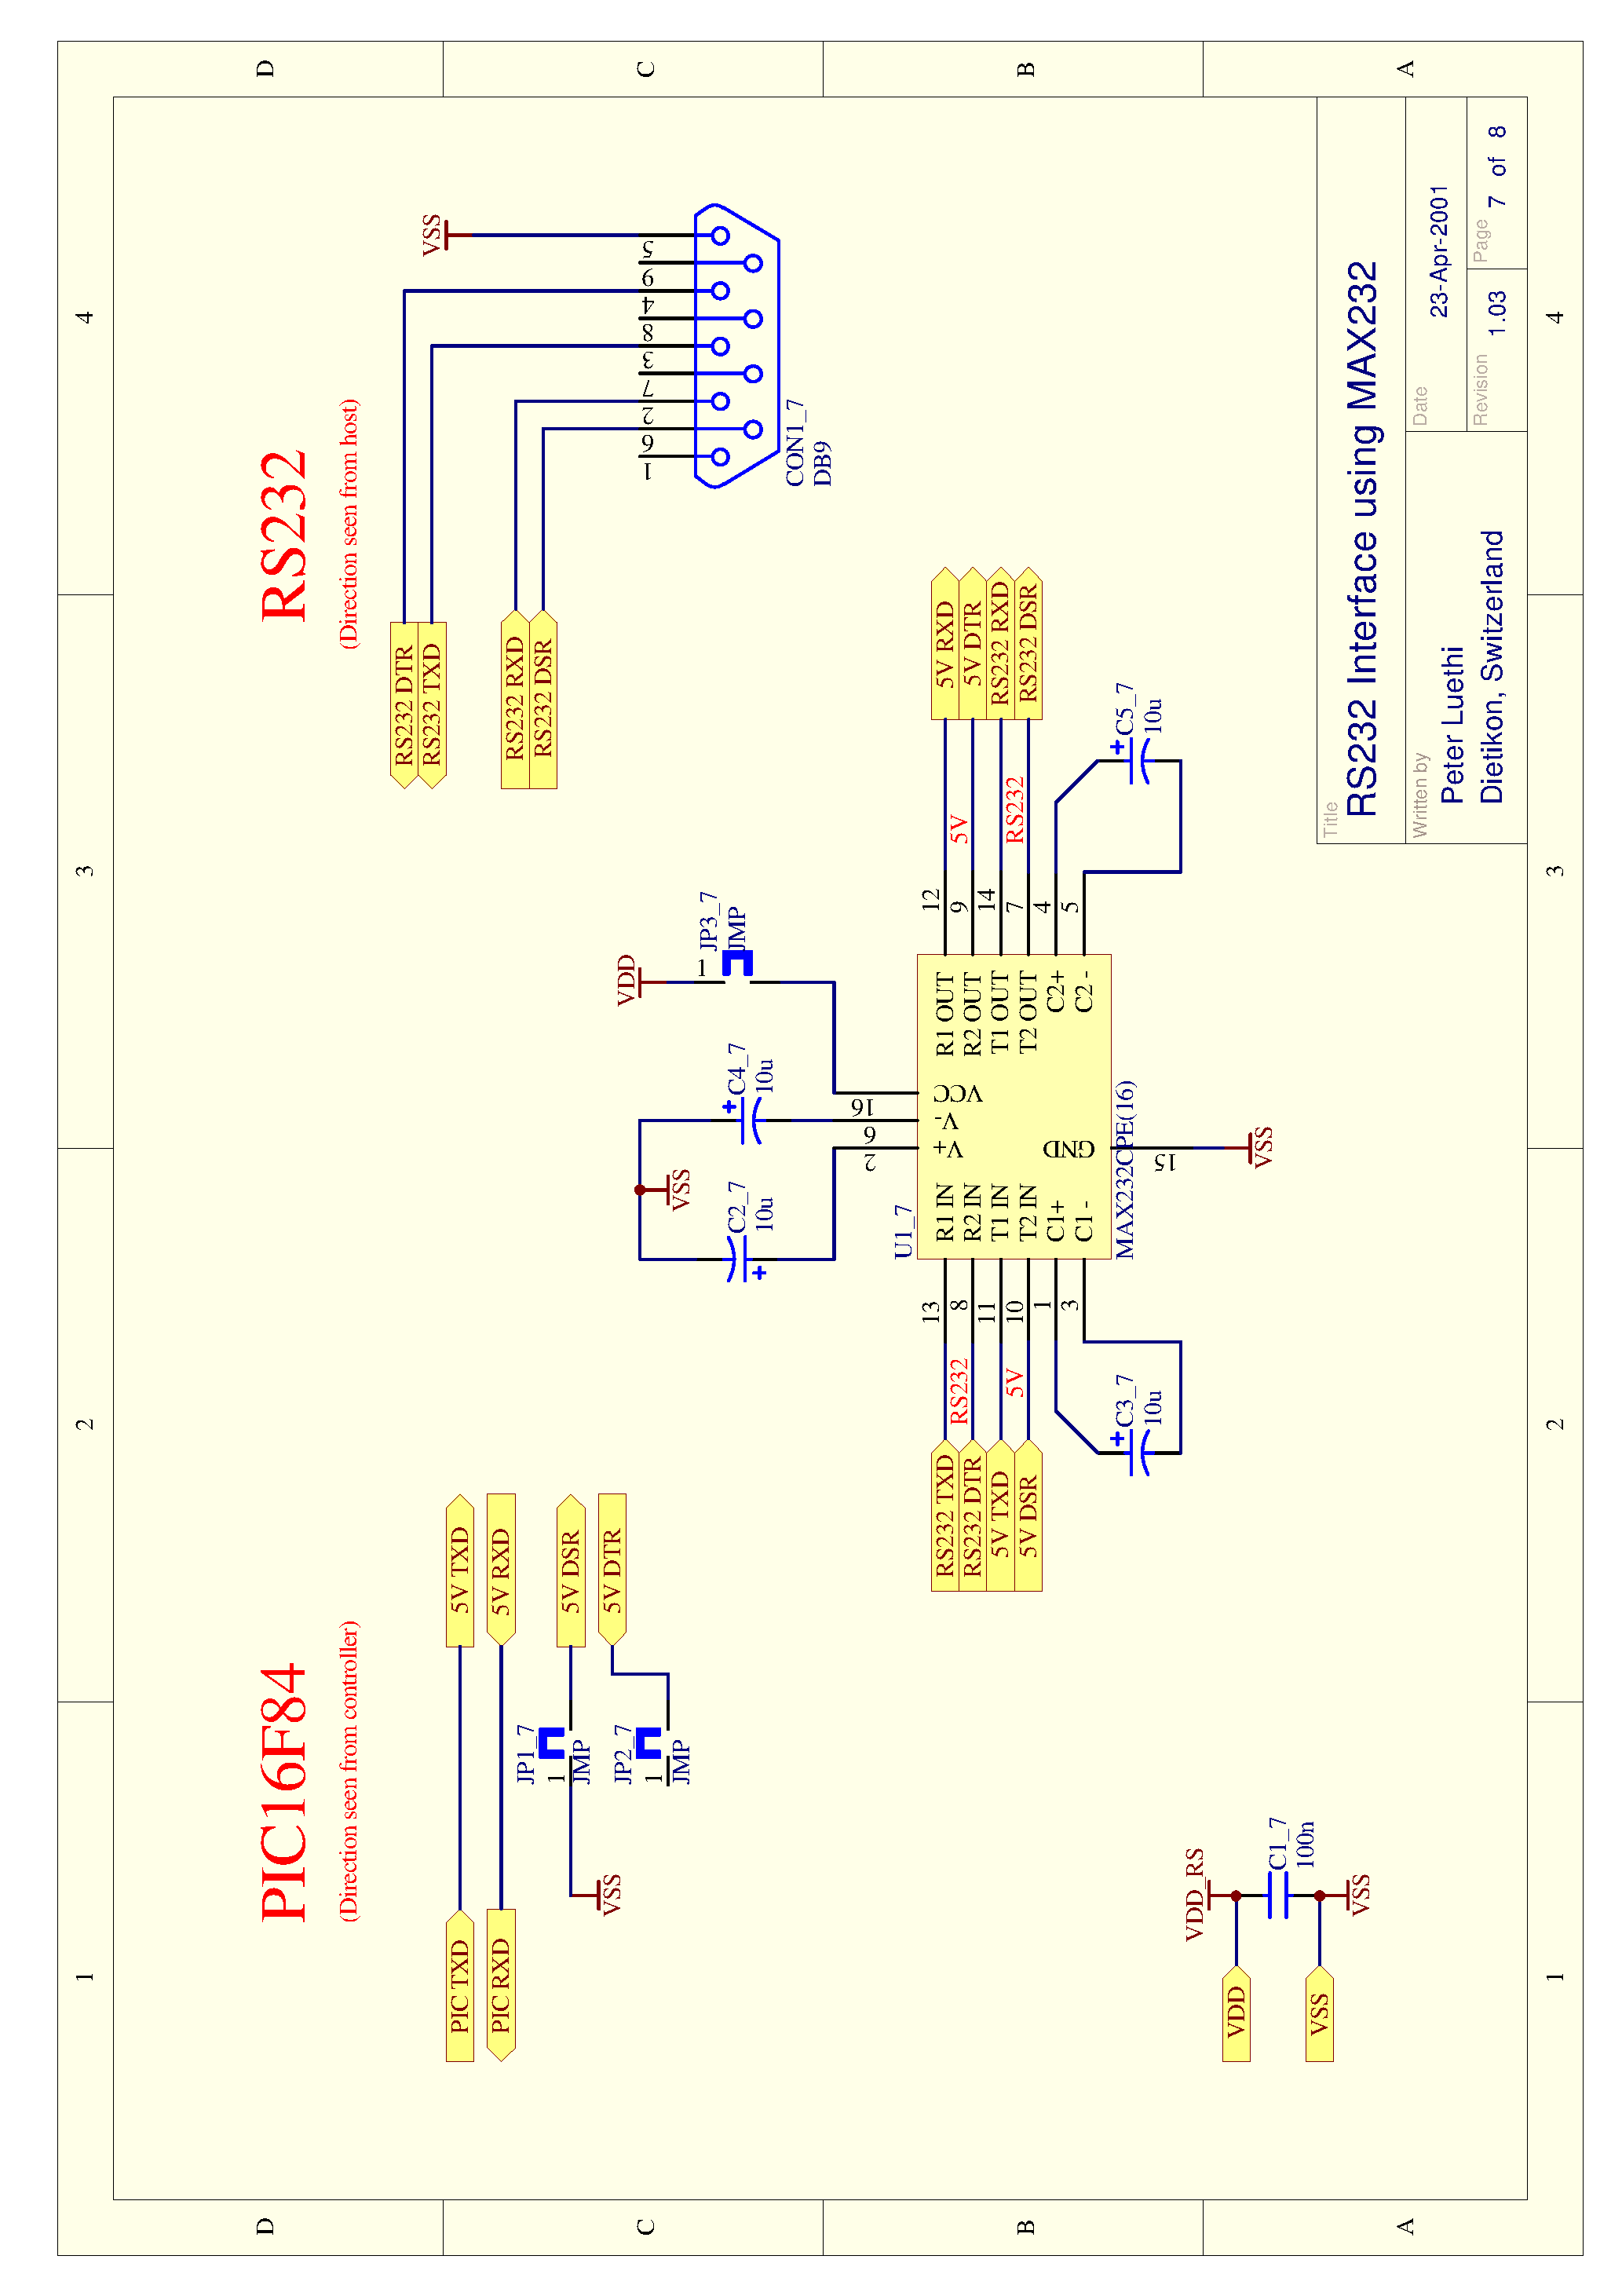 Datasheet rs232 - RS232 Interface using MAX232 page 1